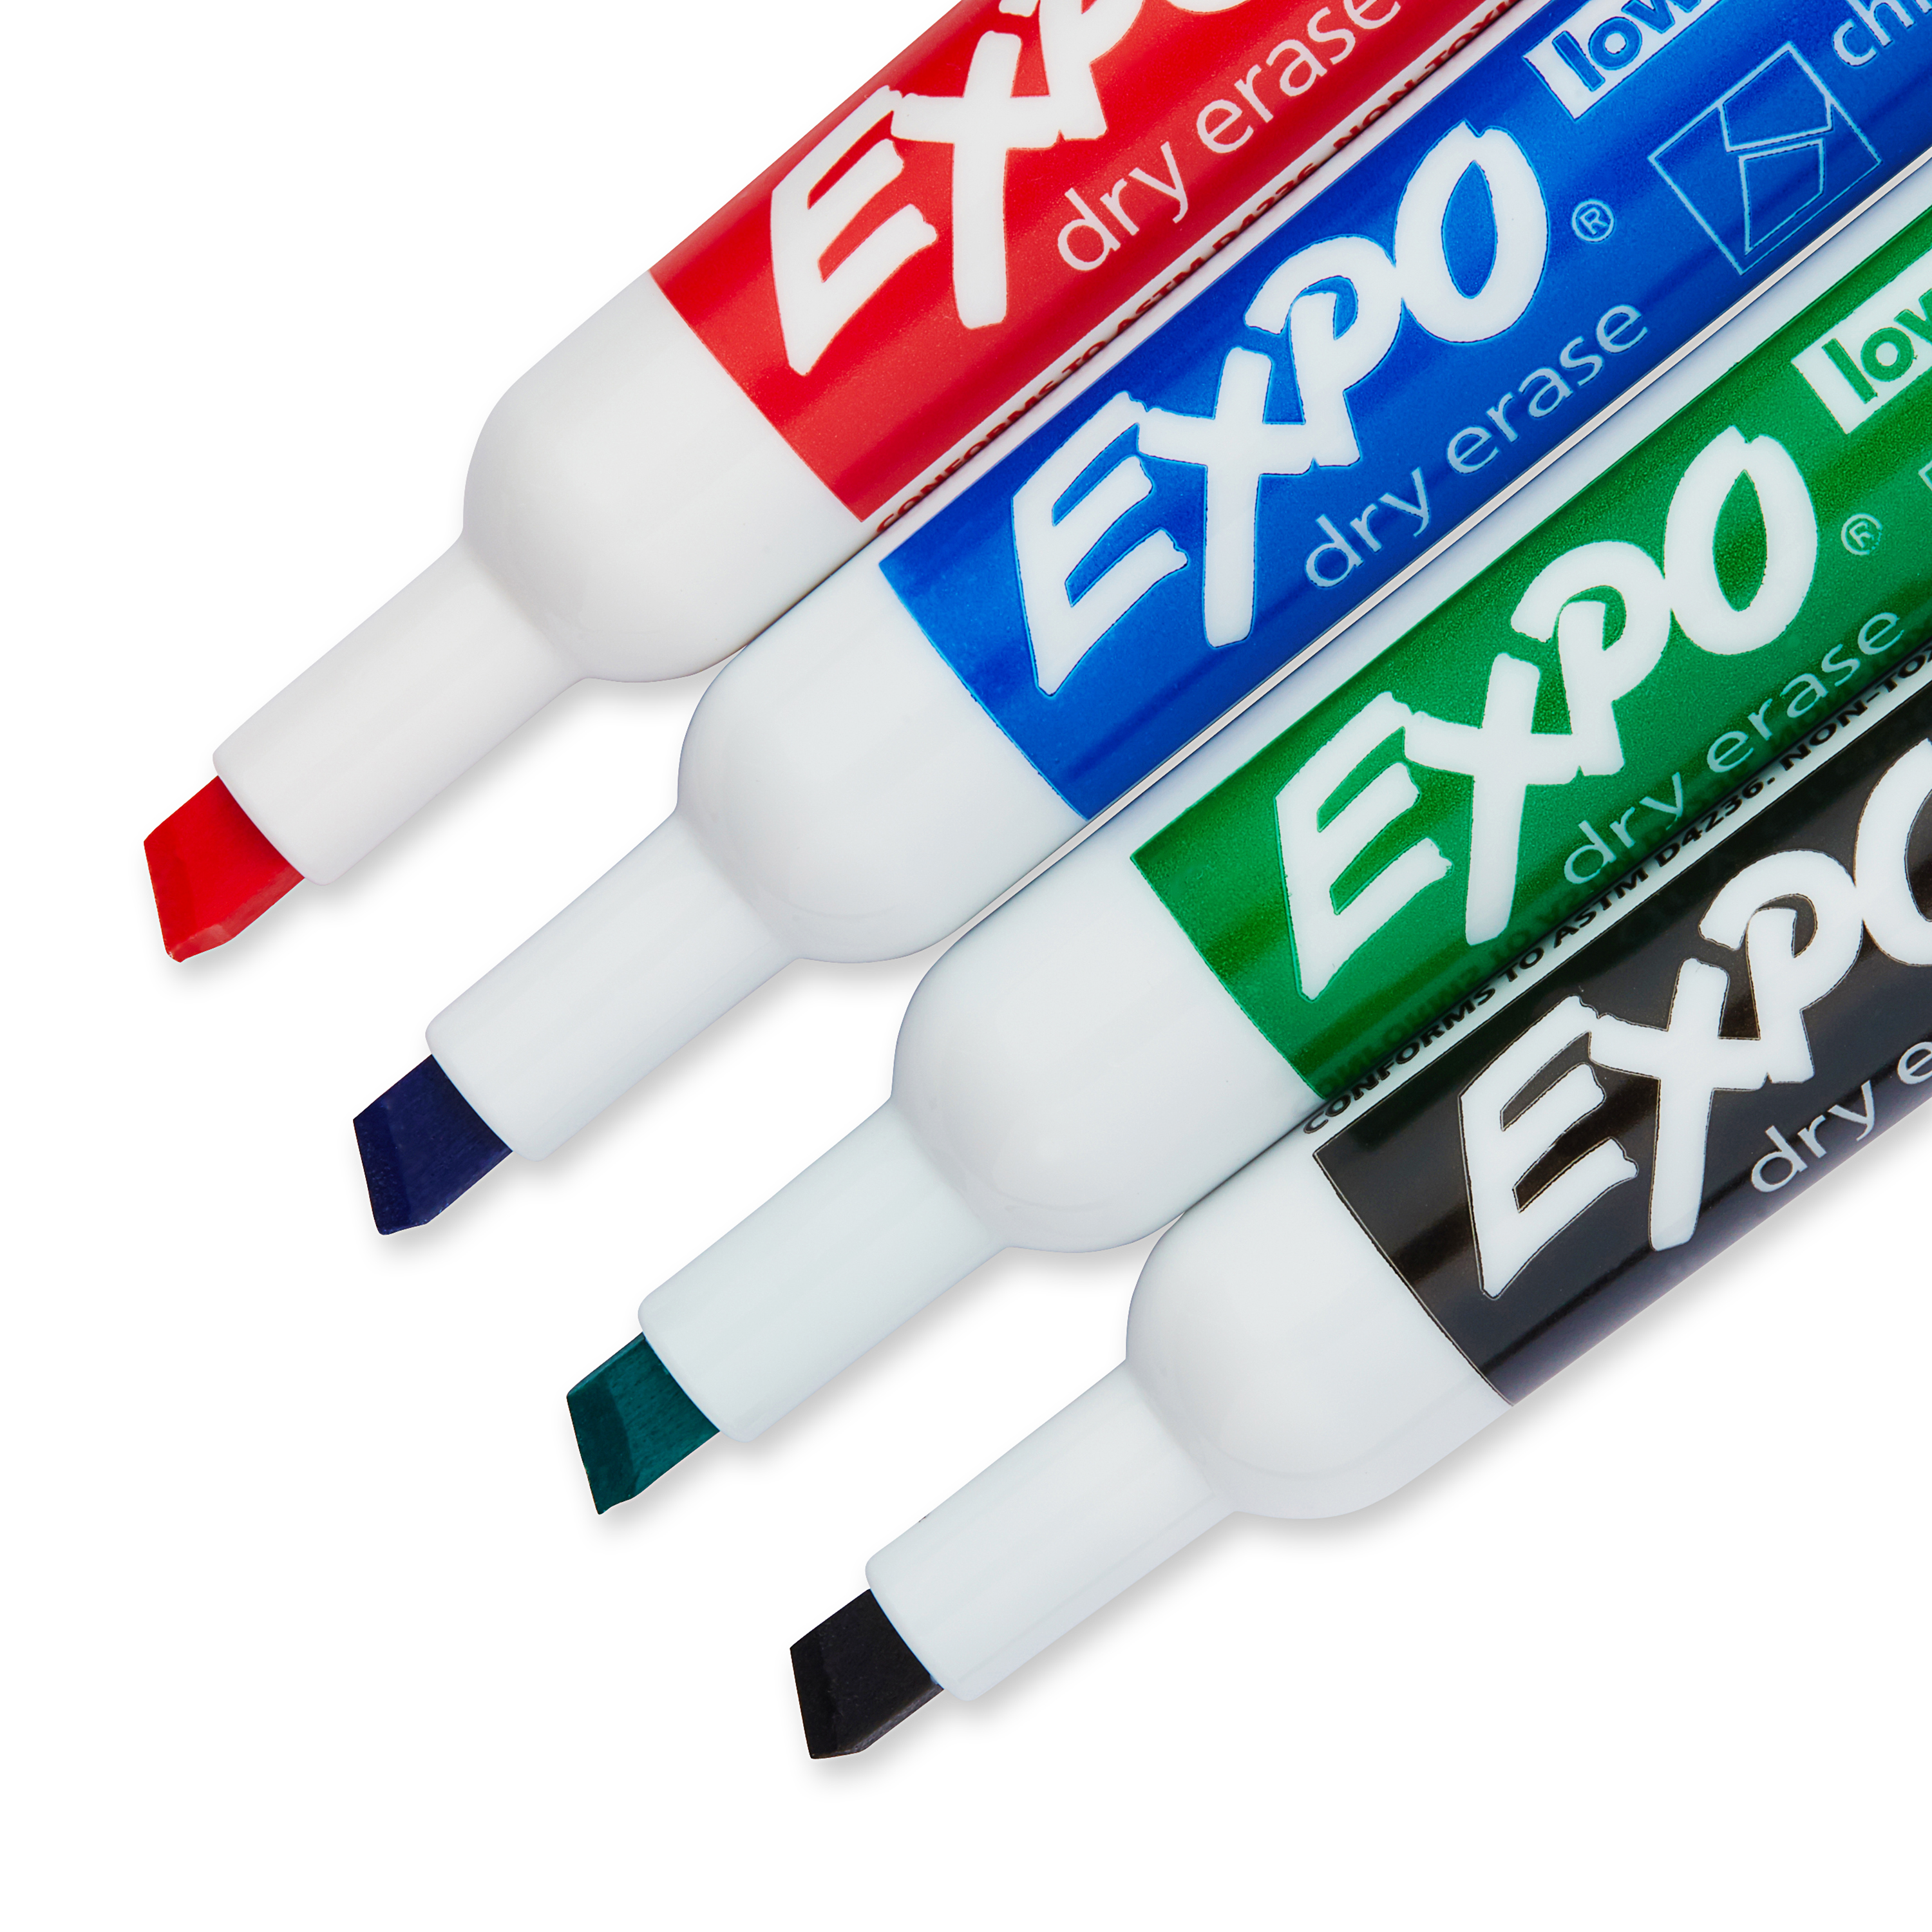 Expo Mountable Whiteboard Caddy with Set of 4 Chisel Markers/Eraser - image 3 of 5